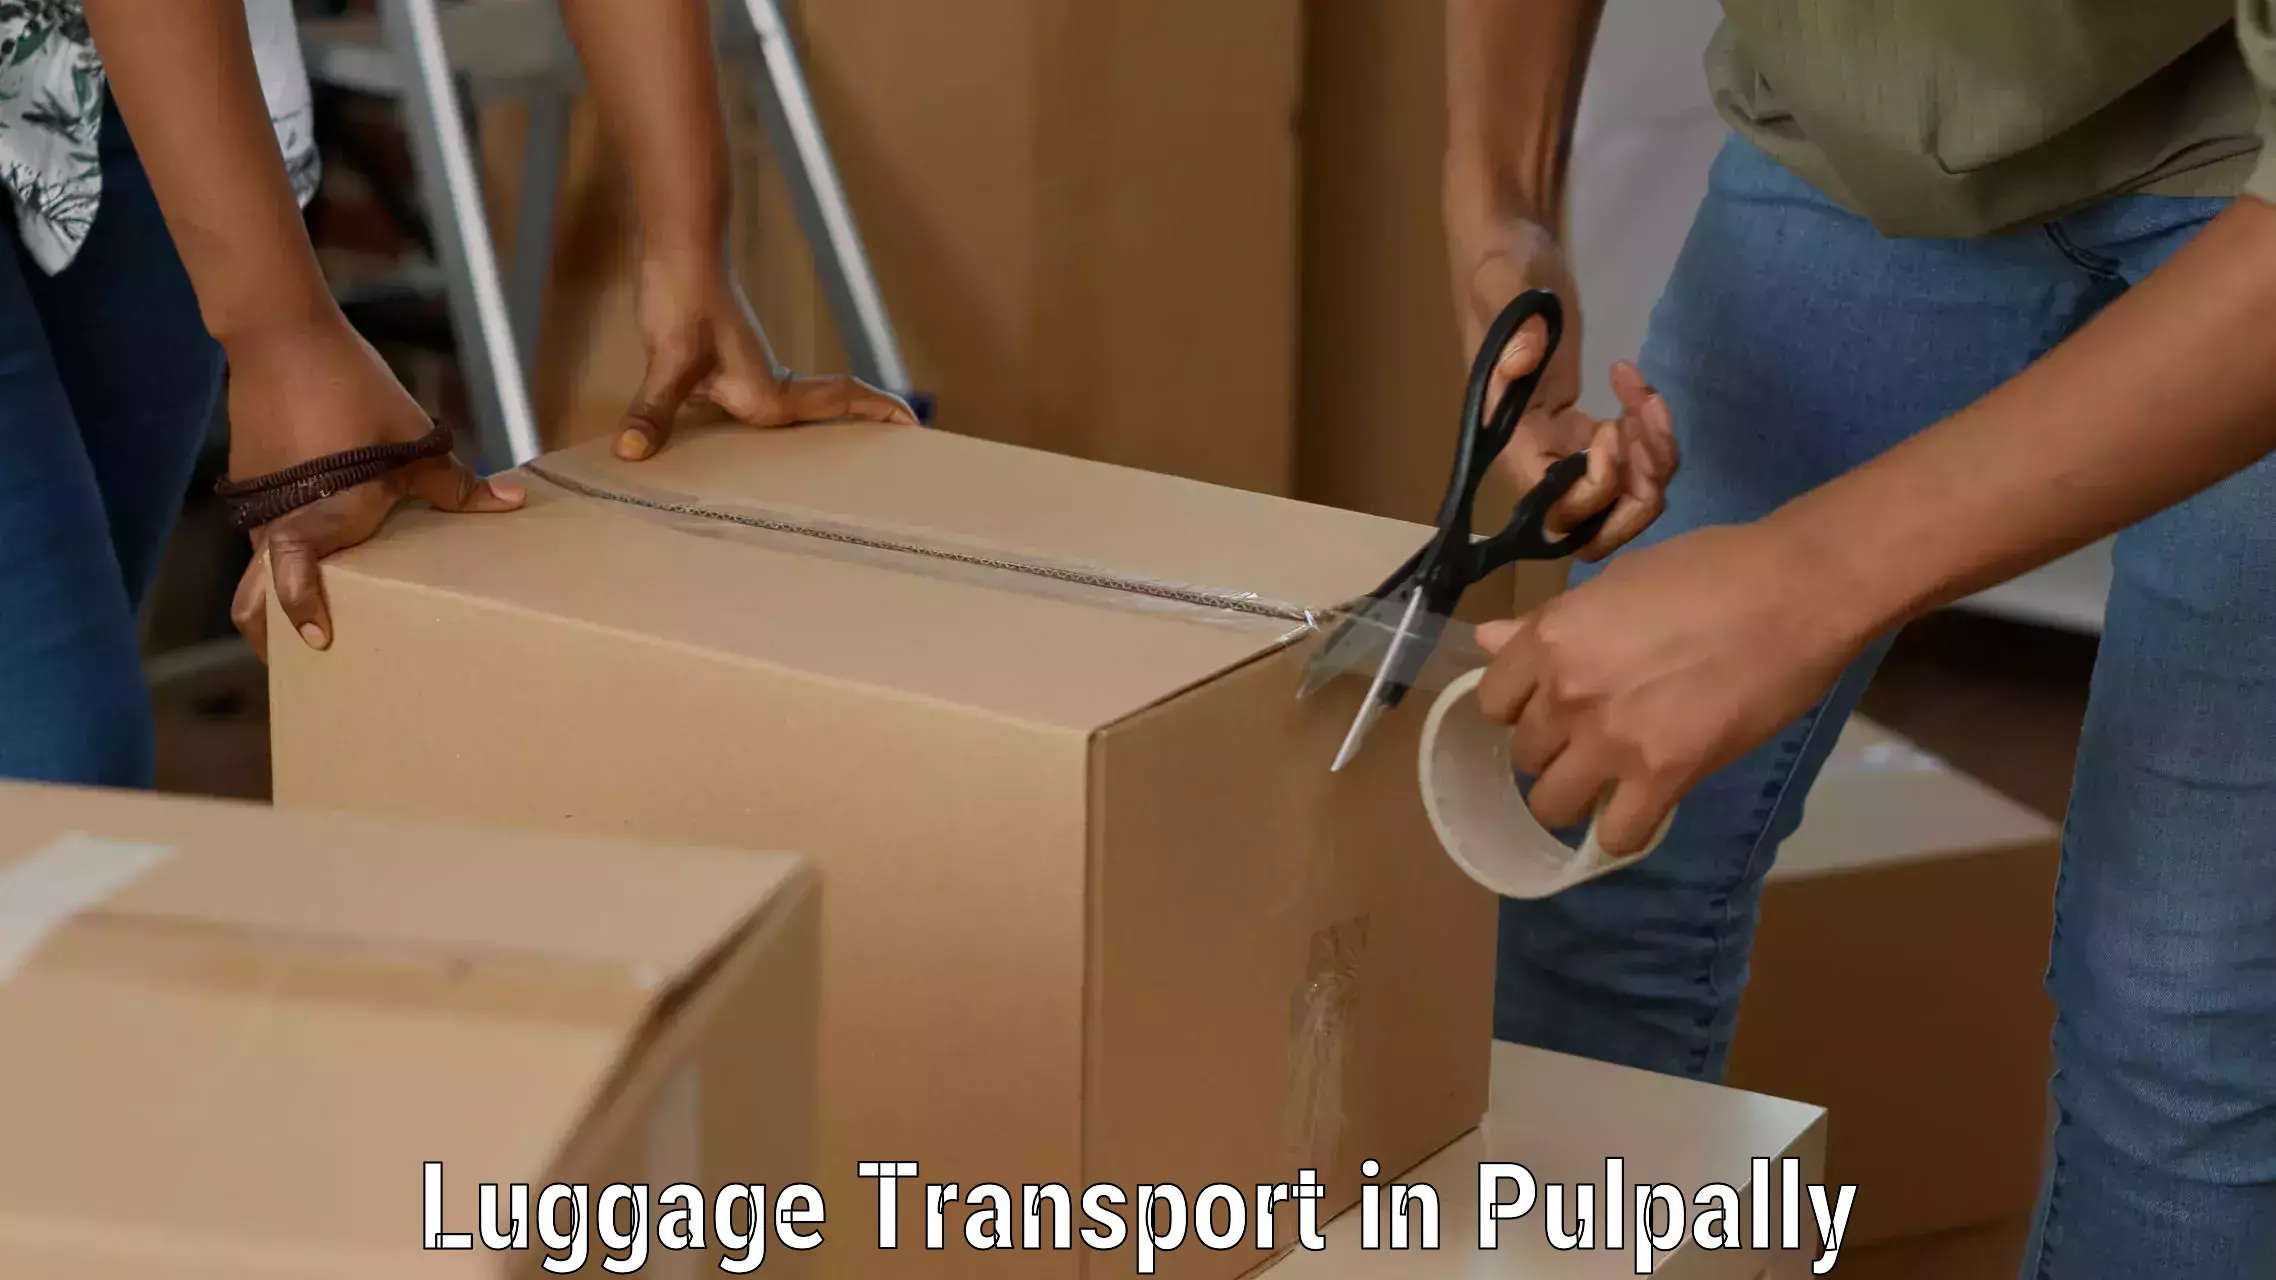 Luggage transport service in Pulpally